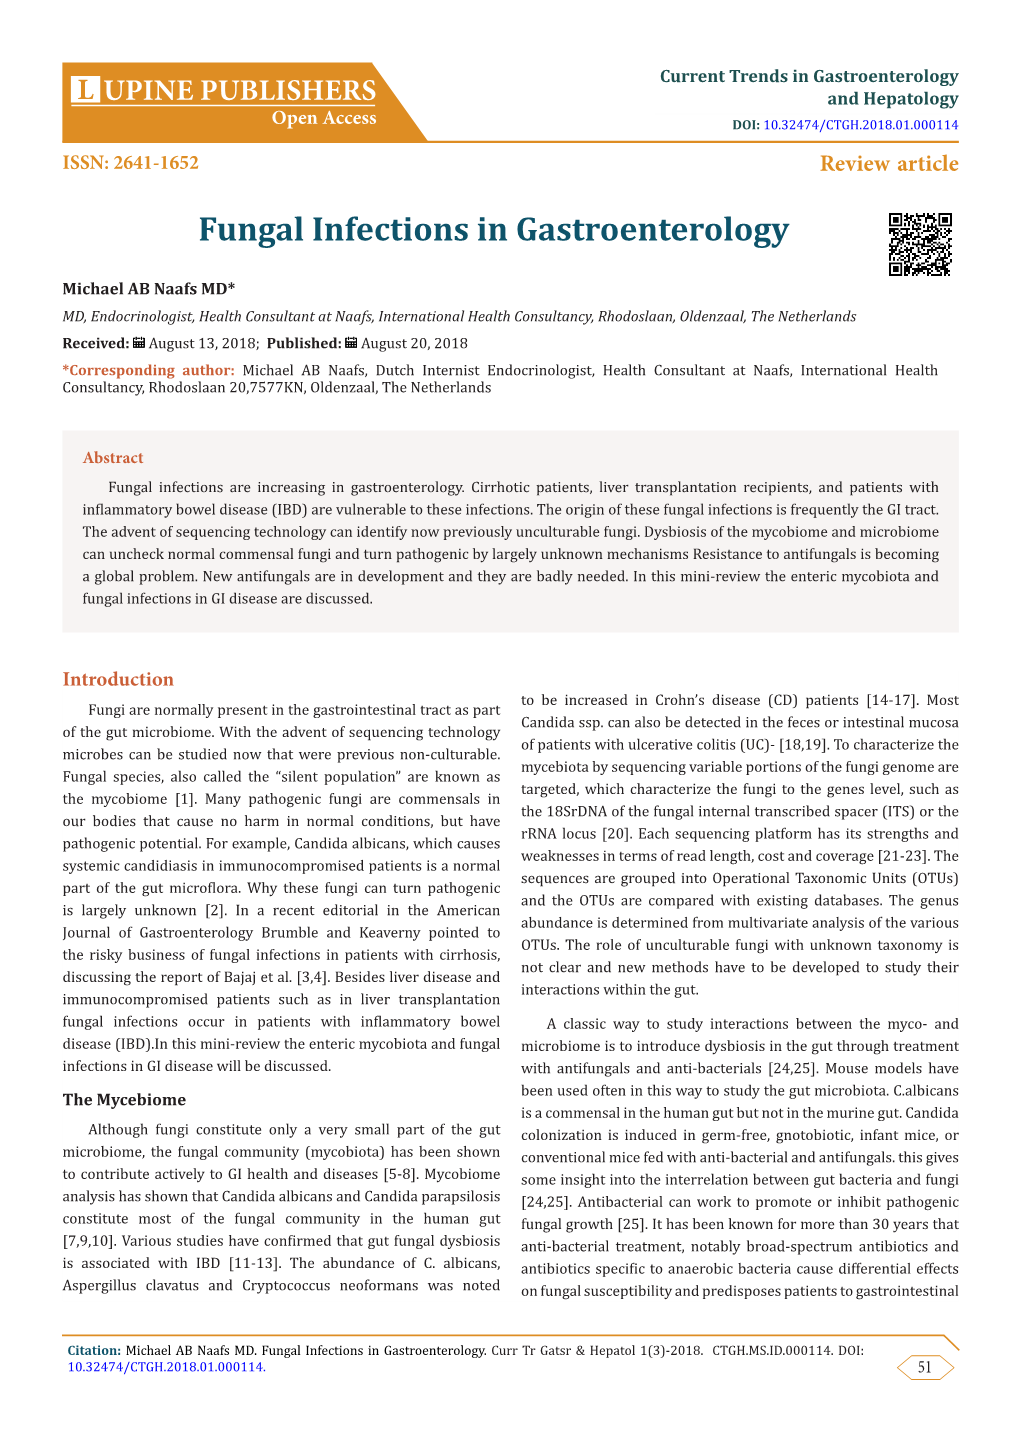 Fungal Infections in Gastroenterology